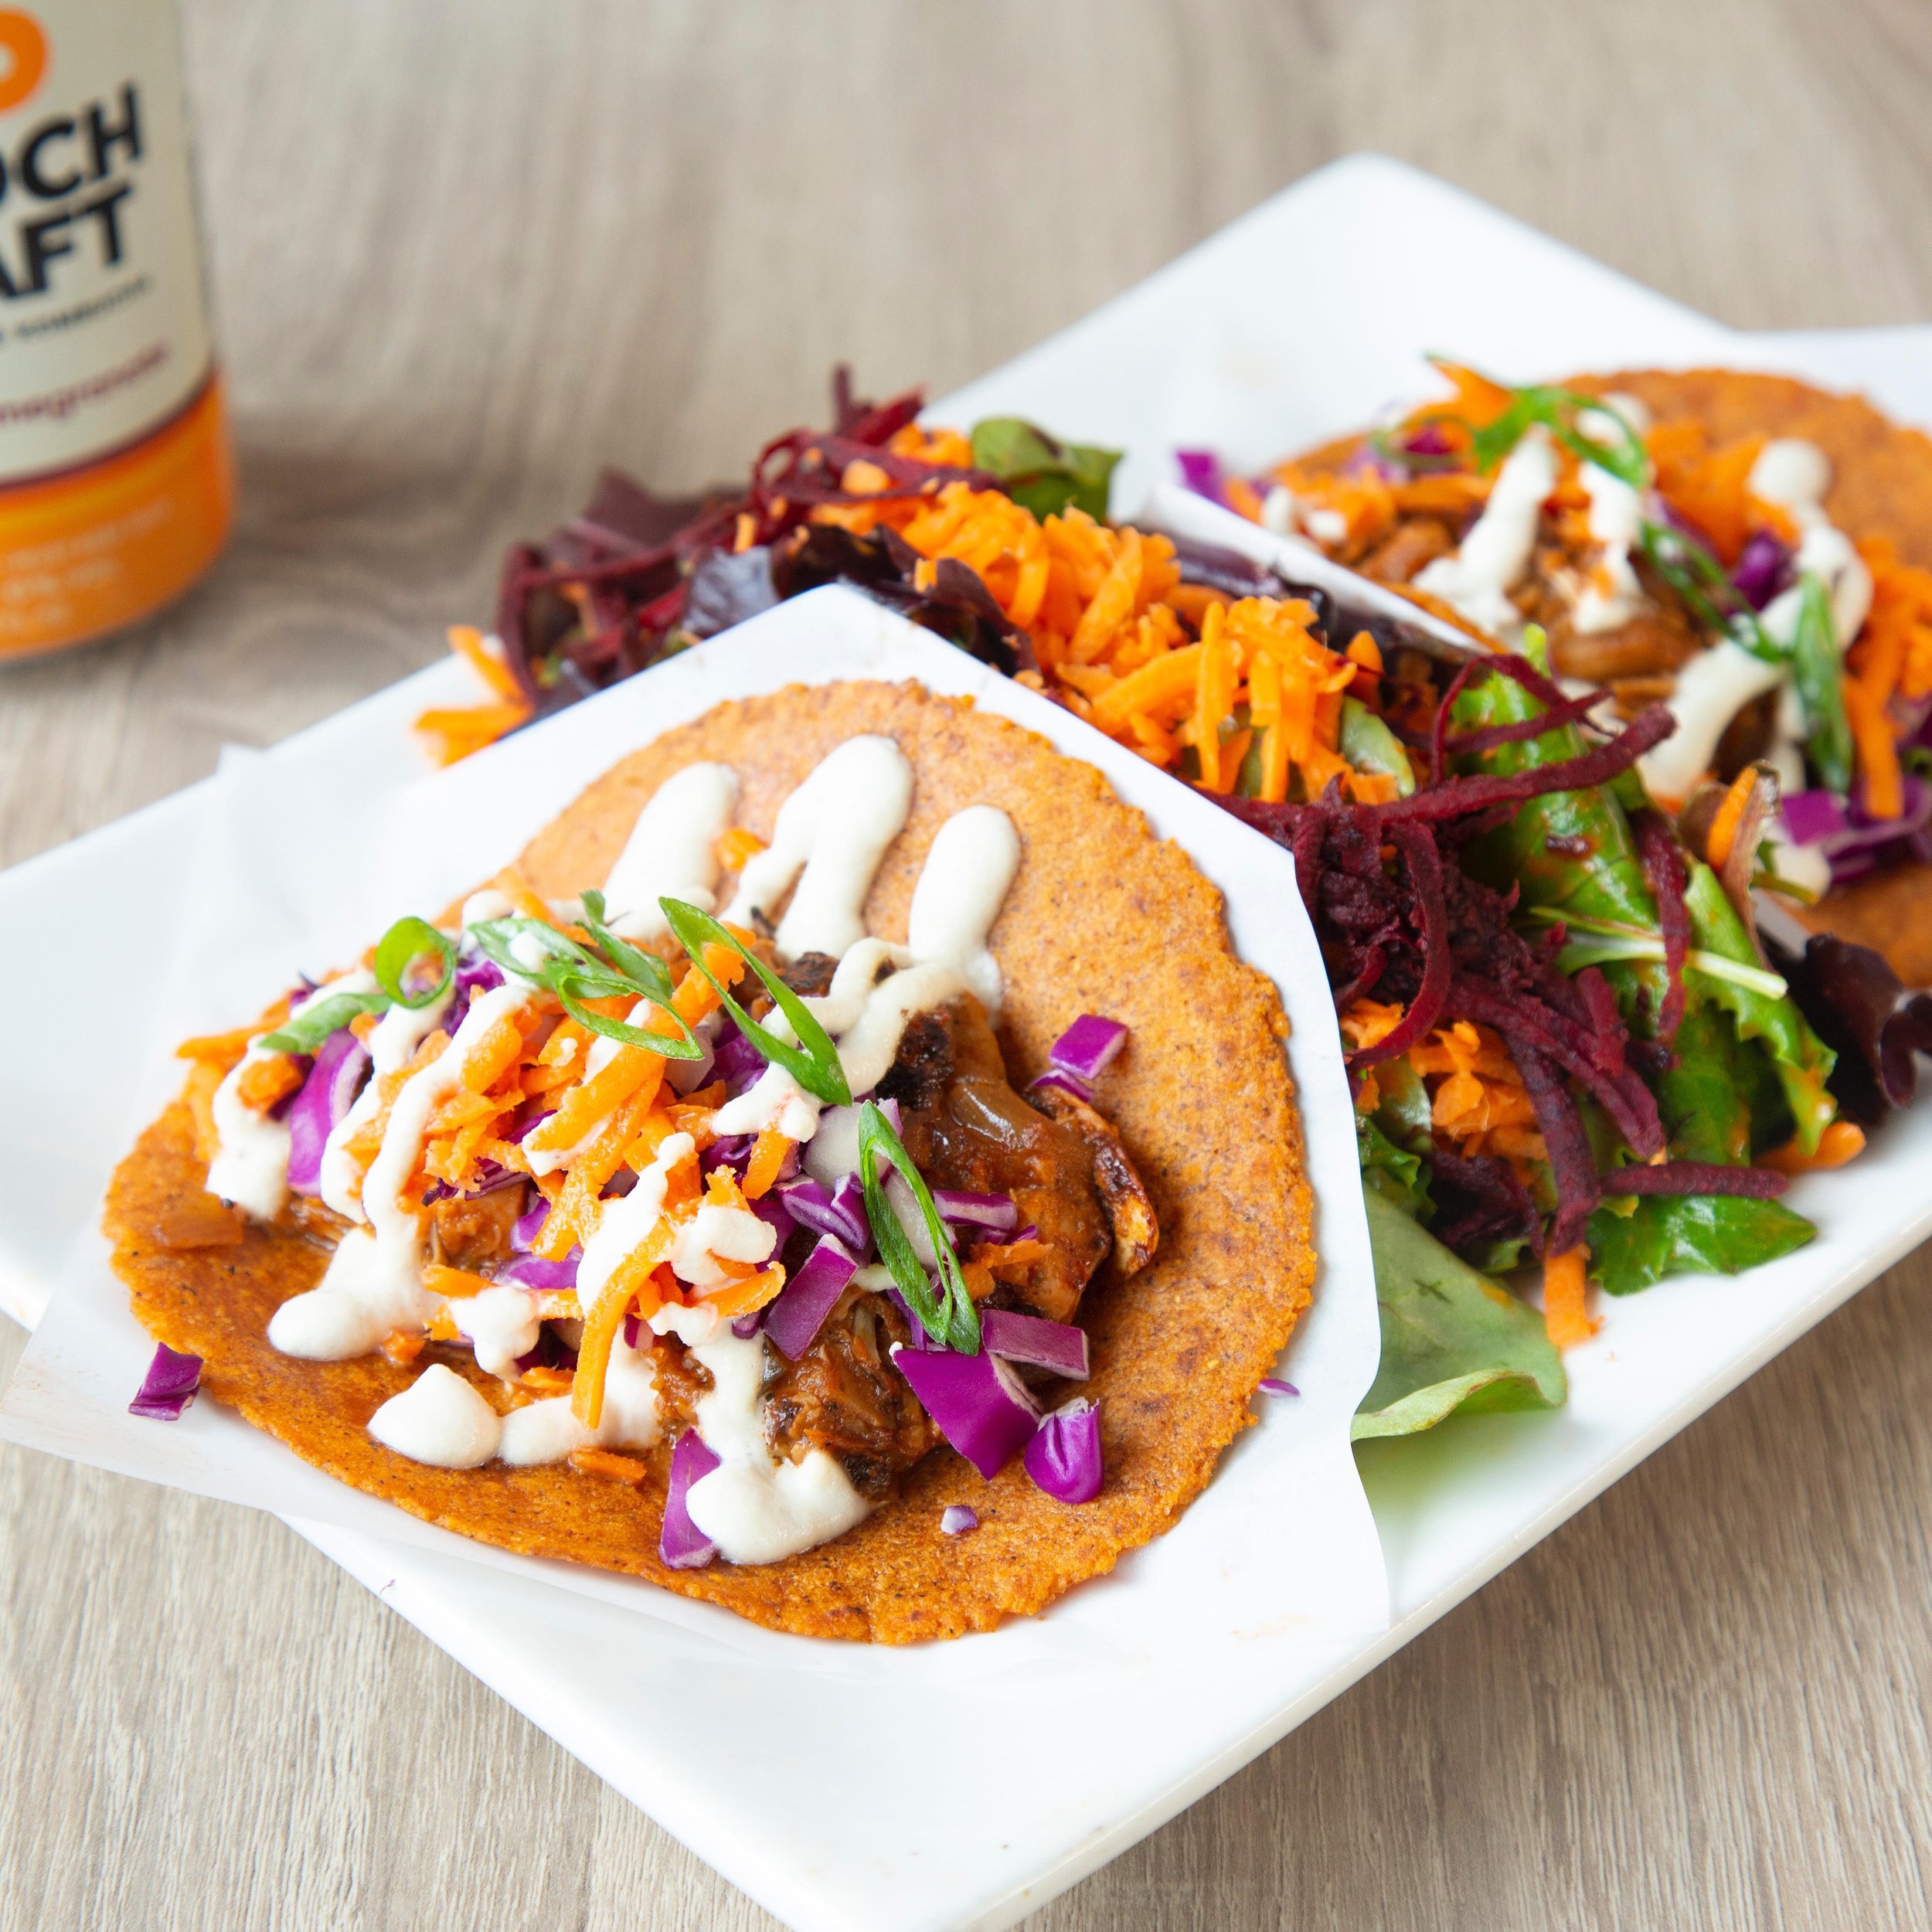 Hey TACO LOVERS! ⁣Come and try our Joyful Jackfruit Tacos - Our home made soft corn tortillas filled with sweet bbq jackfruit, fresh red cabbage, shredded carrot, sour cream and green onions⁣ 🌮🙌⁣
⁣⁣
Join us on our rooftop for food, drinks, + our da